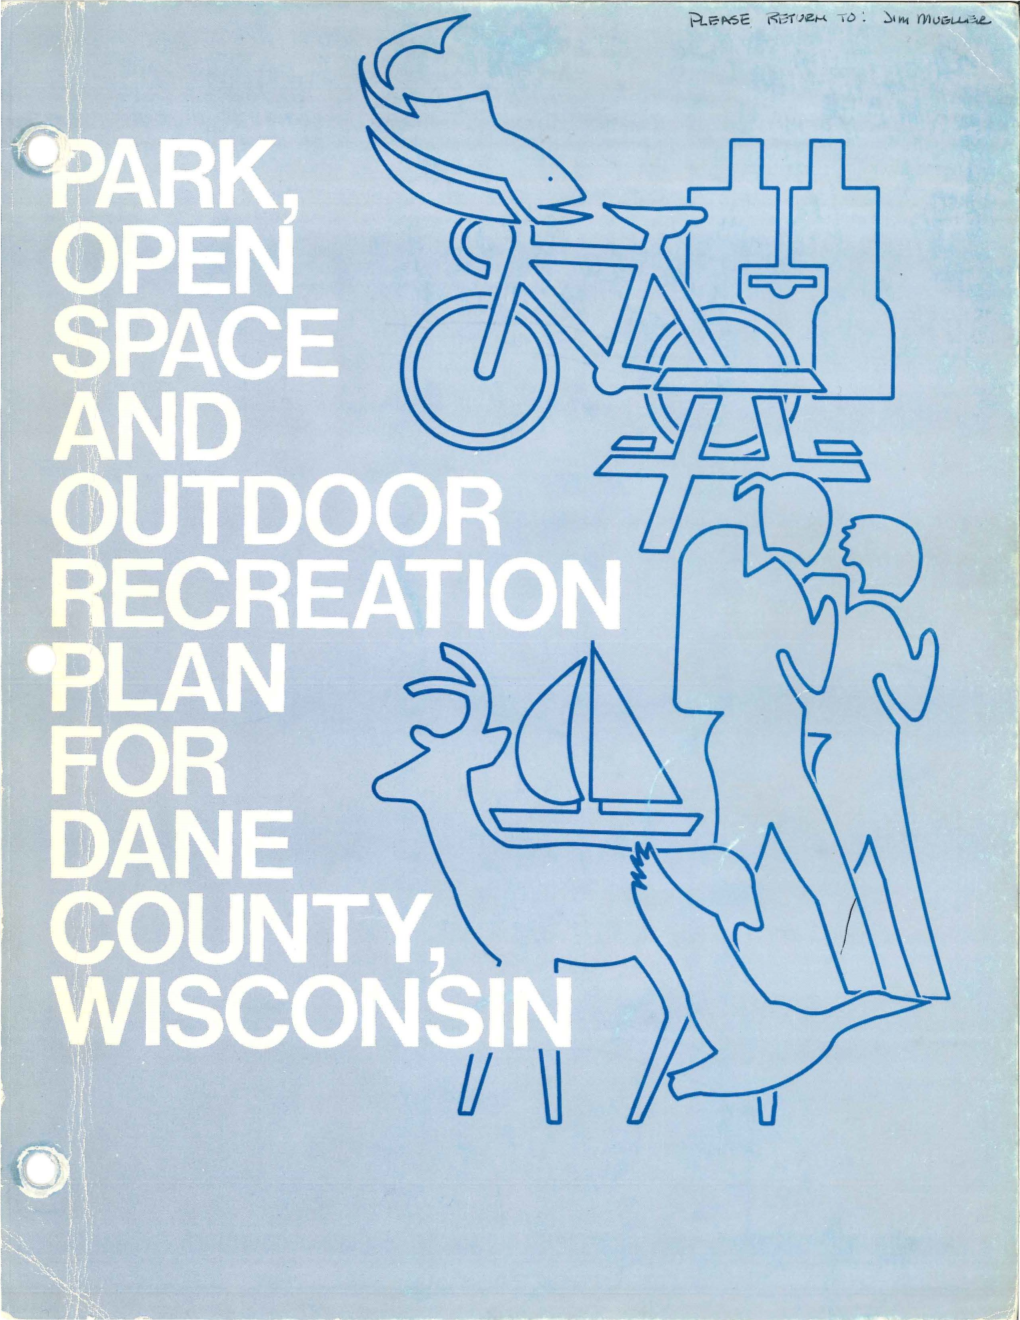 1983 Dane County Park, Open Space and Outdoor